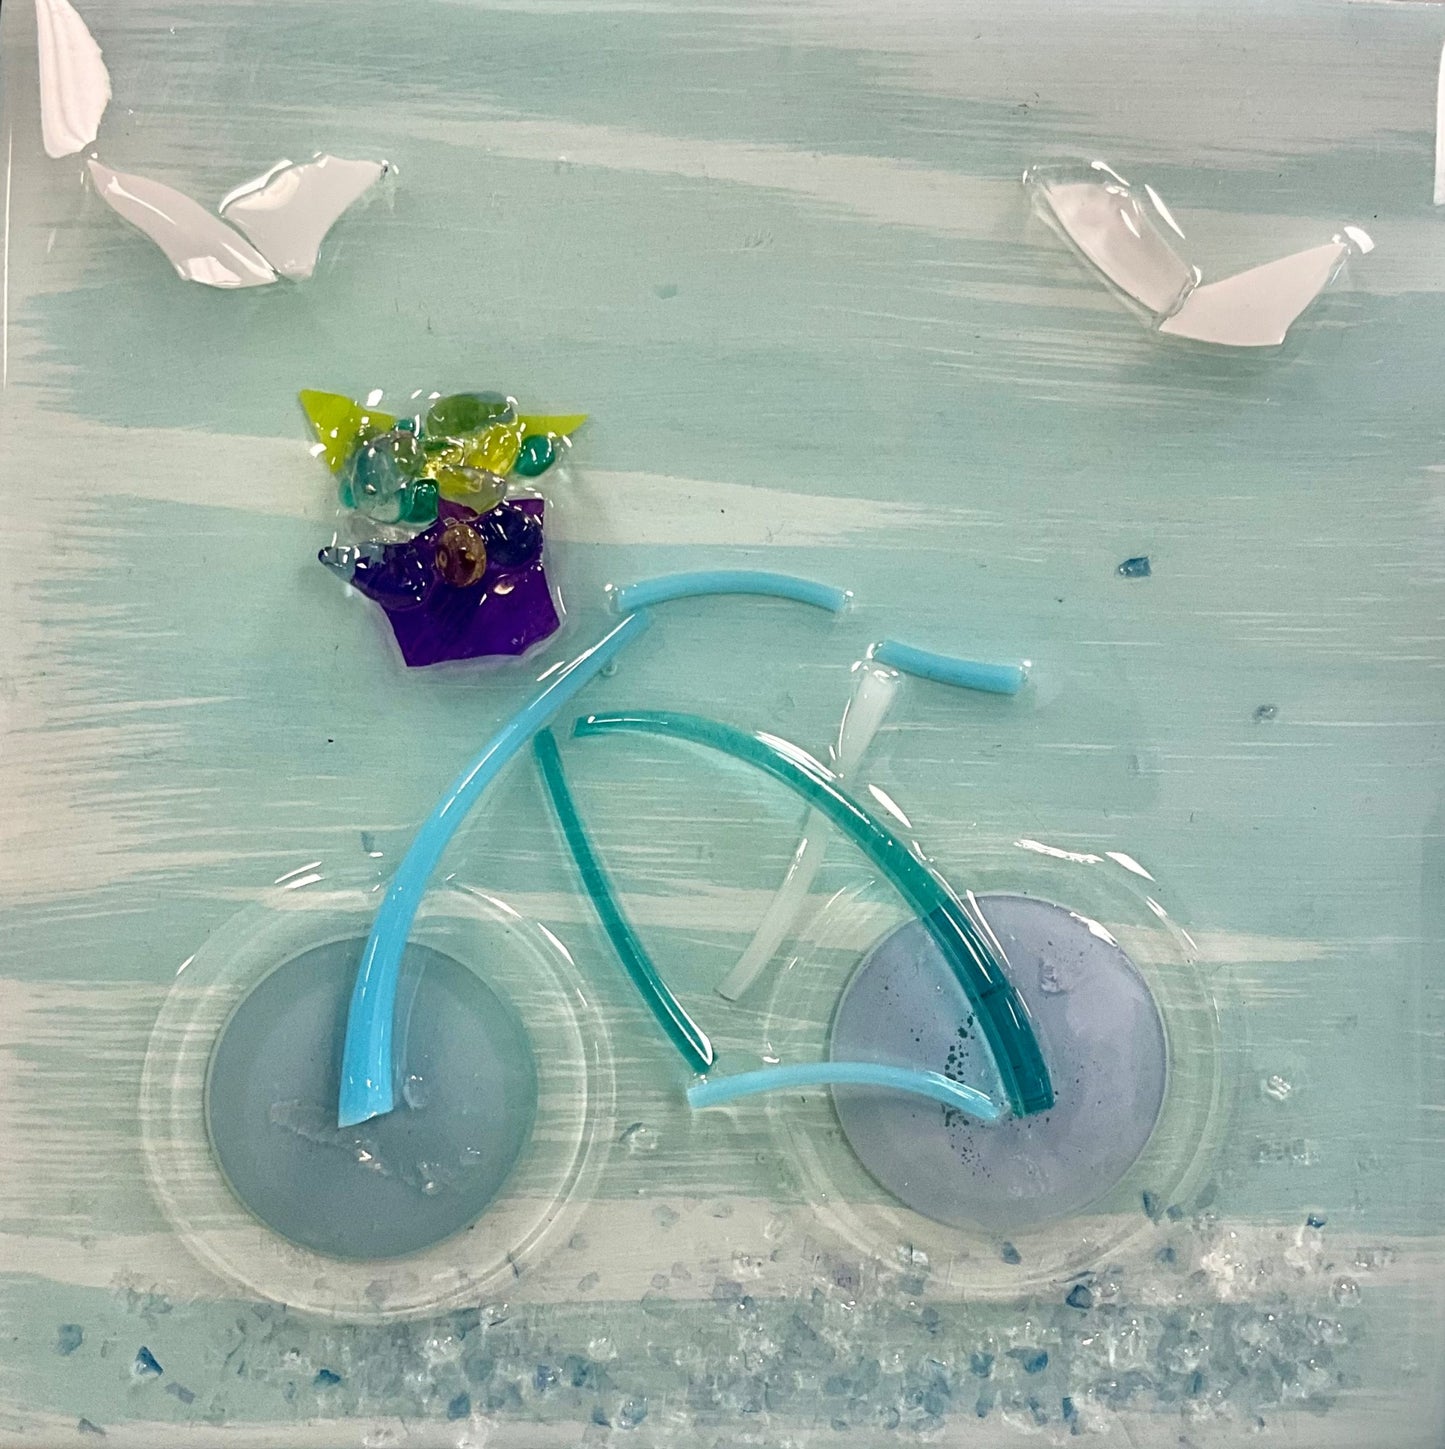 Shattered Glass Art-Bicycle